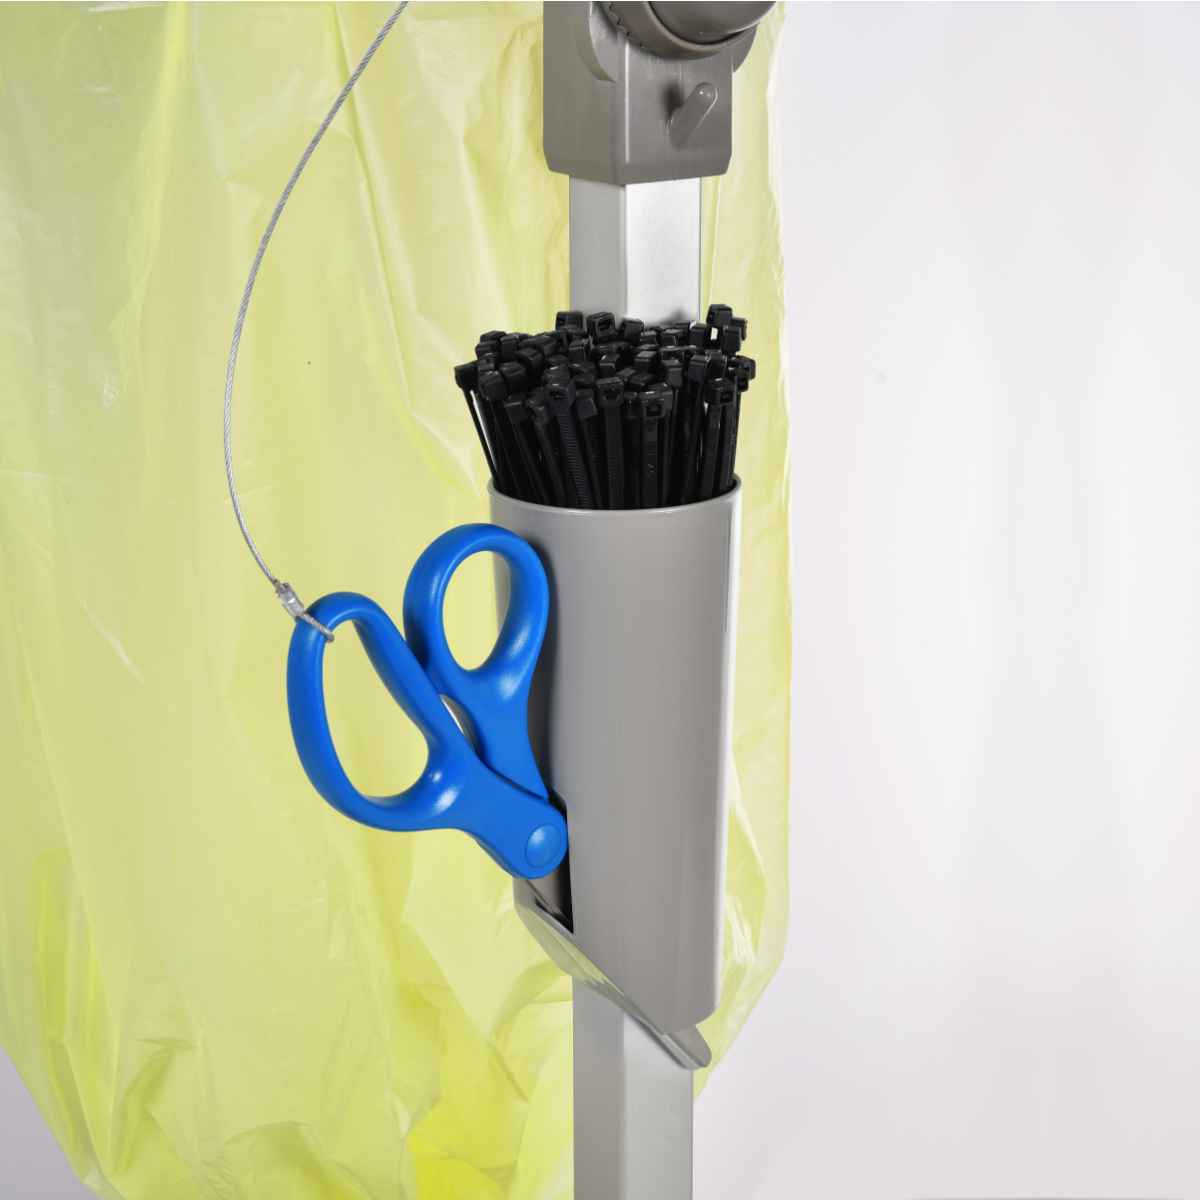 30470_Cable Tie Holder_Longopac Stand Classic